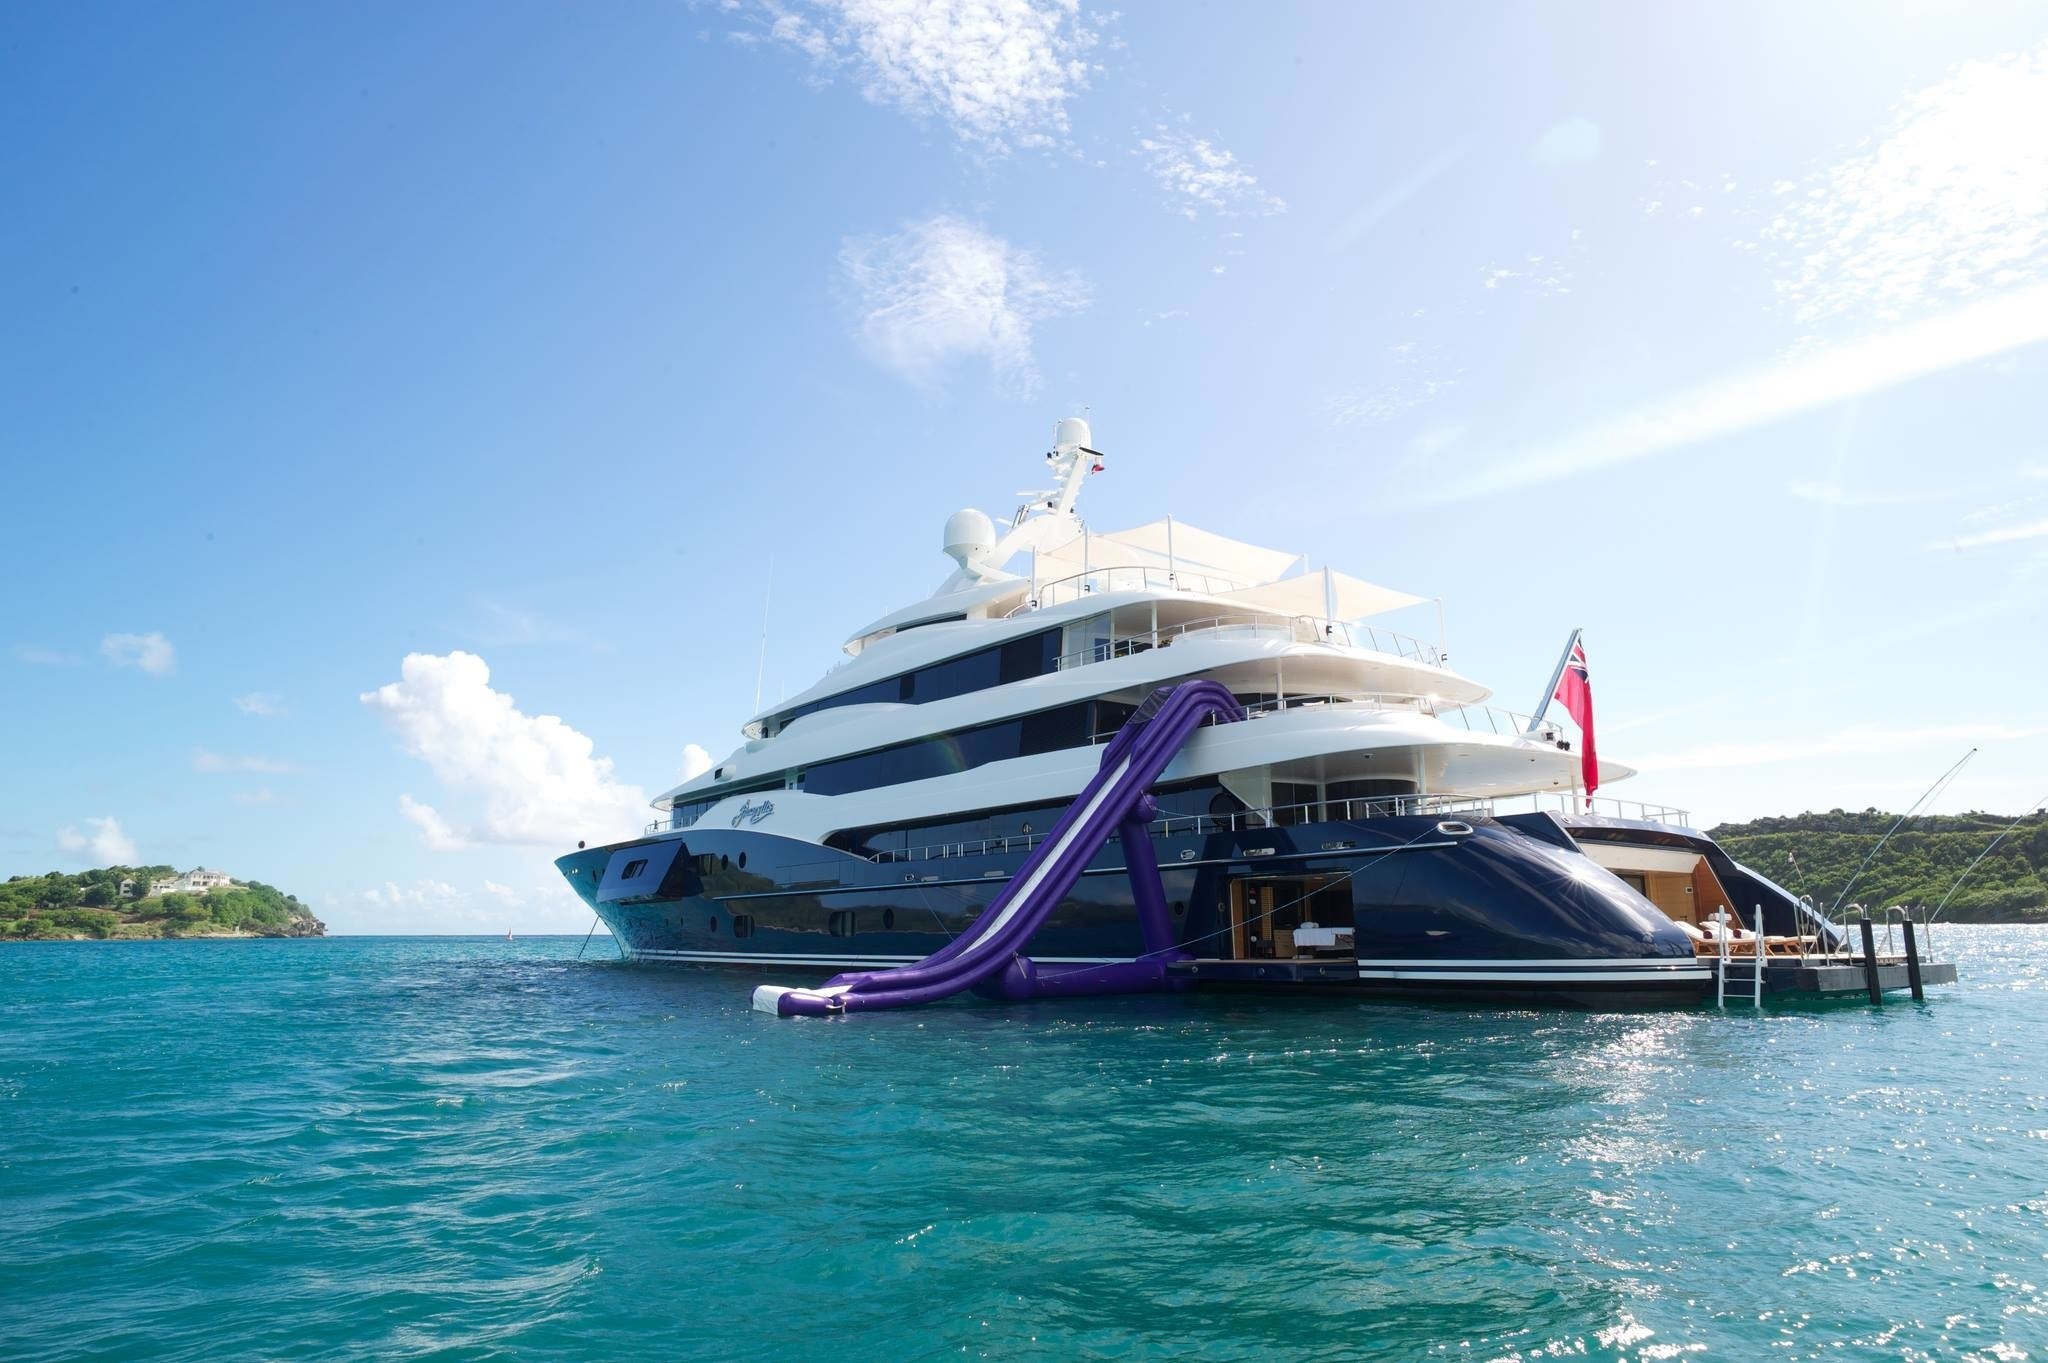 78m superyacht with waterslide